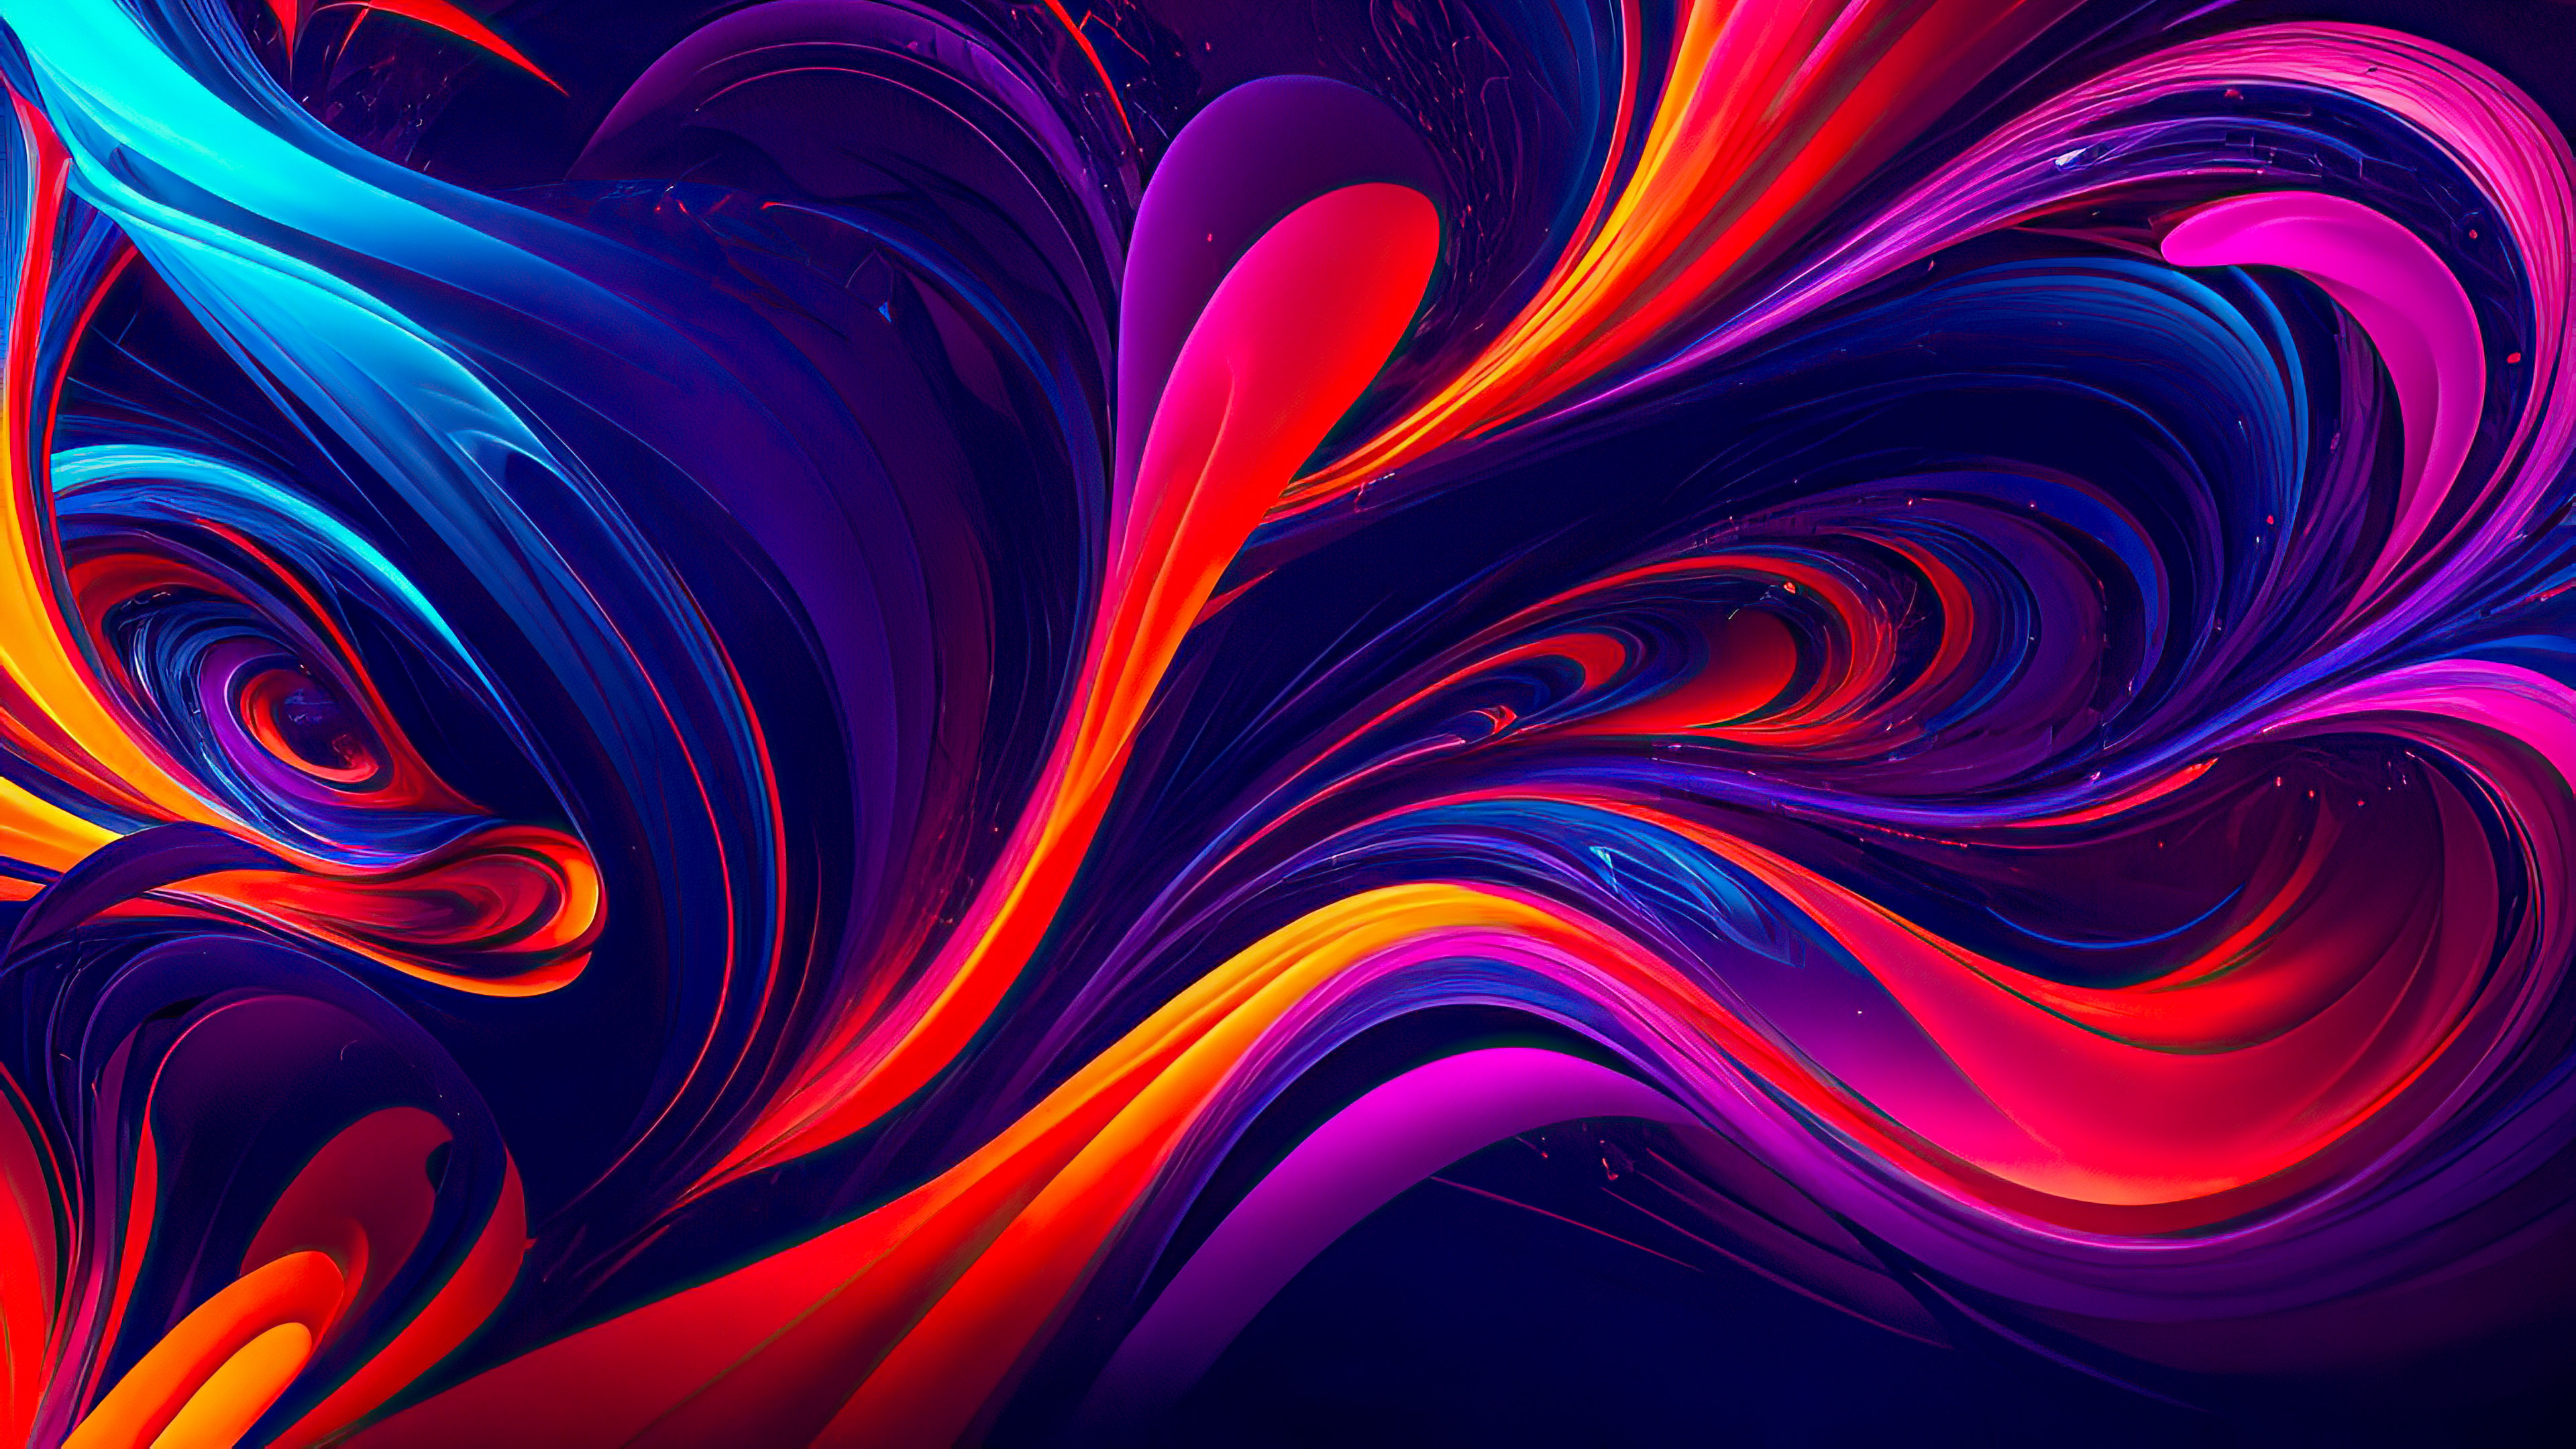 Indulge in the dynamic energy of abstract wallpapers in 4K, where vibrant swirls of neon colors dance against a dark background.